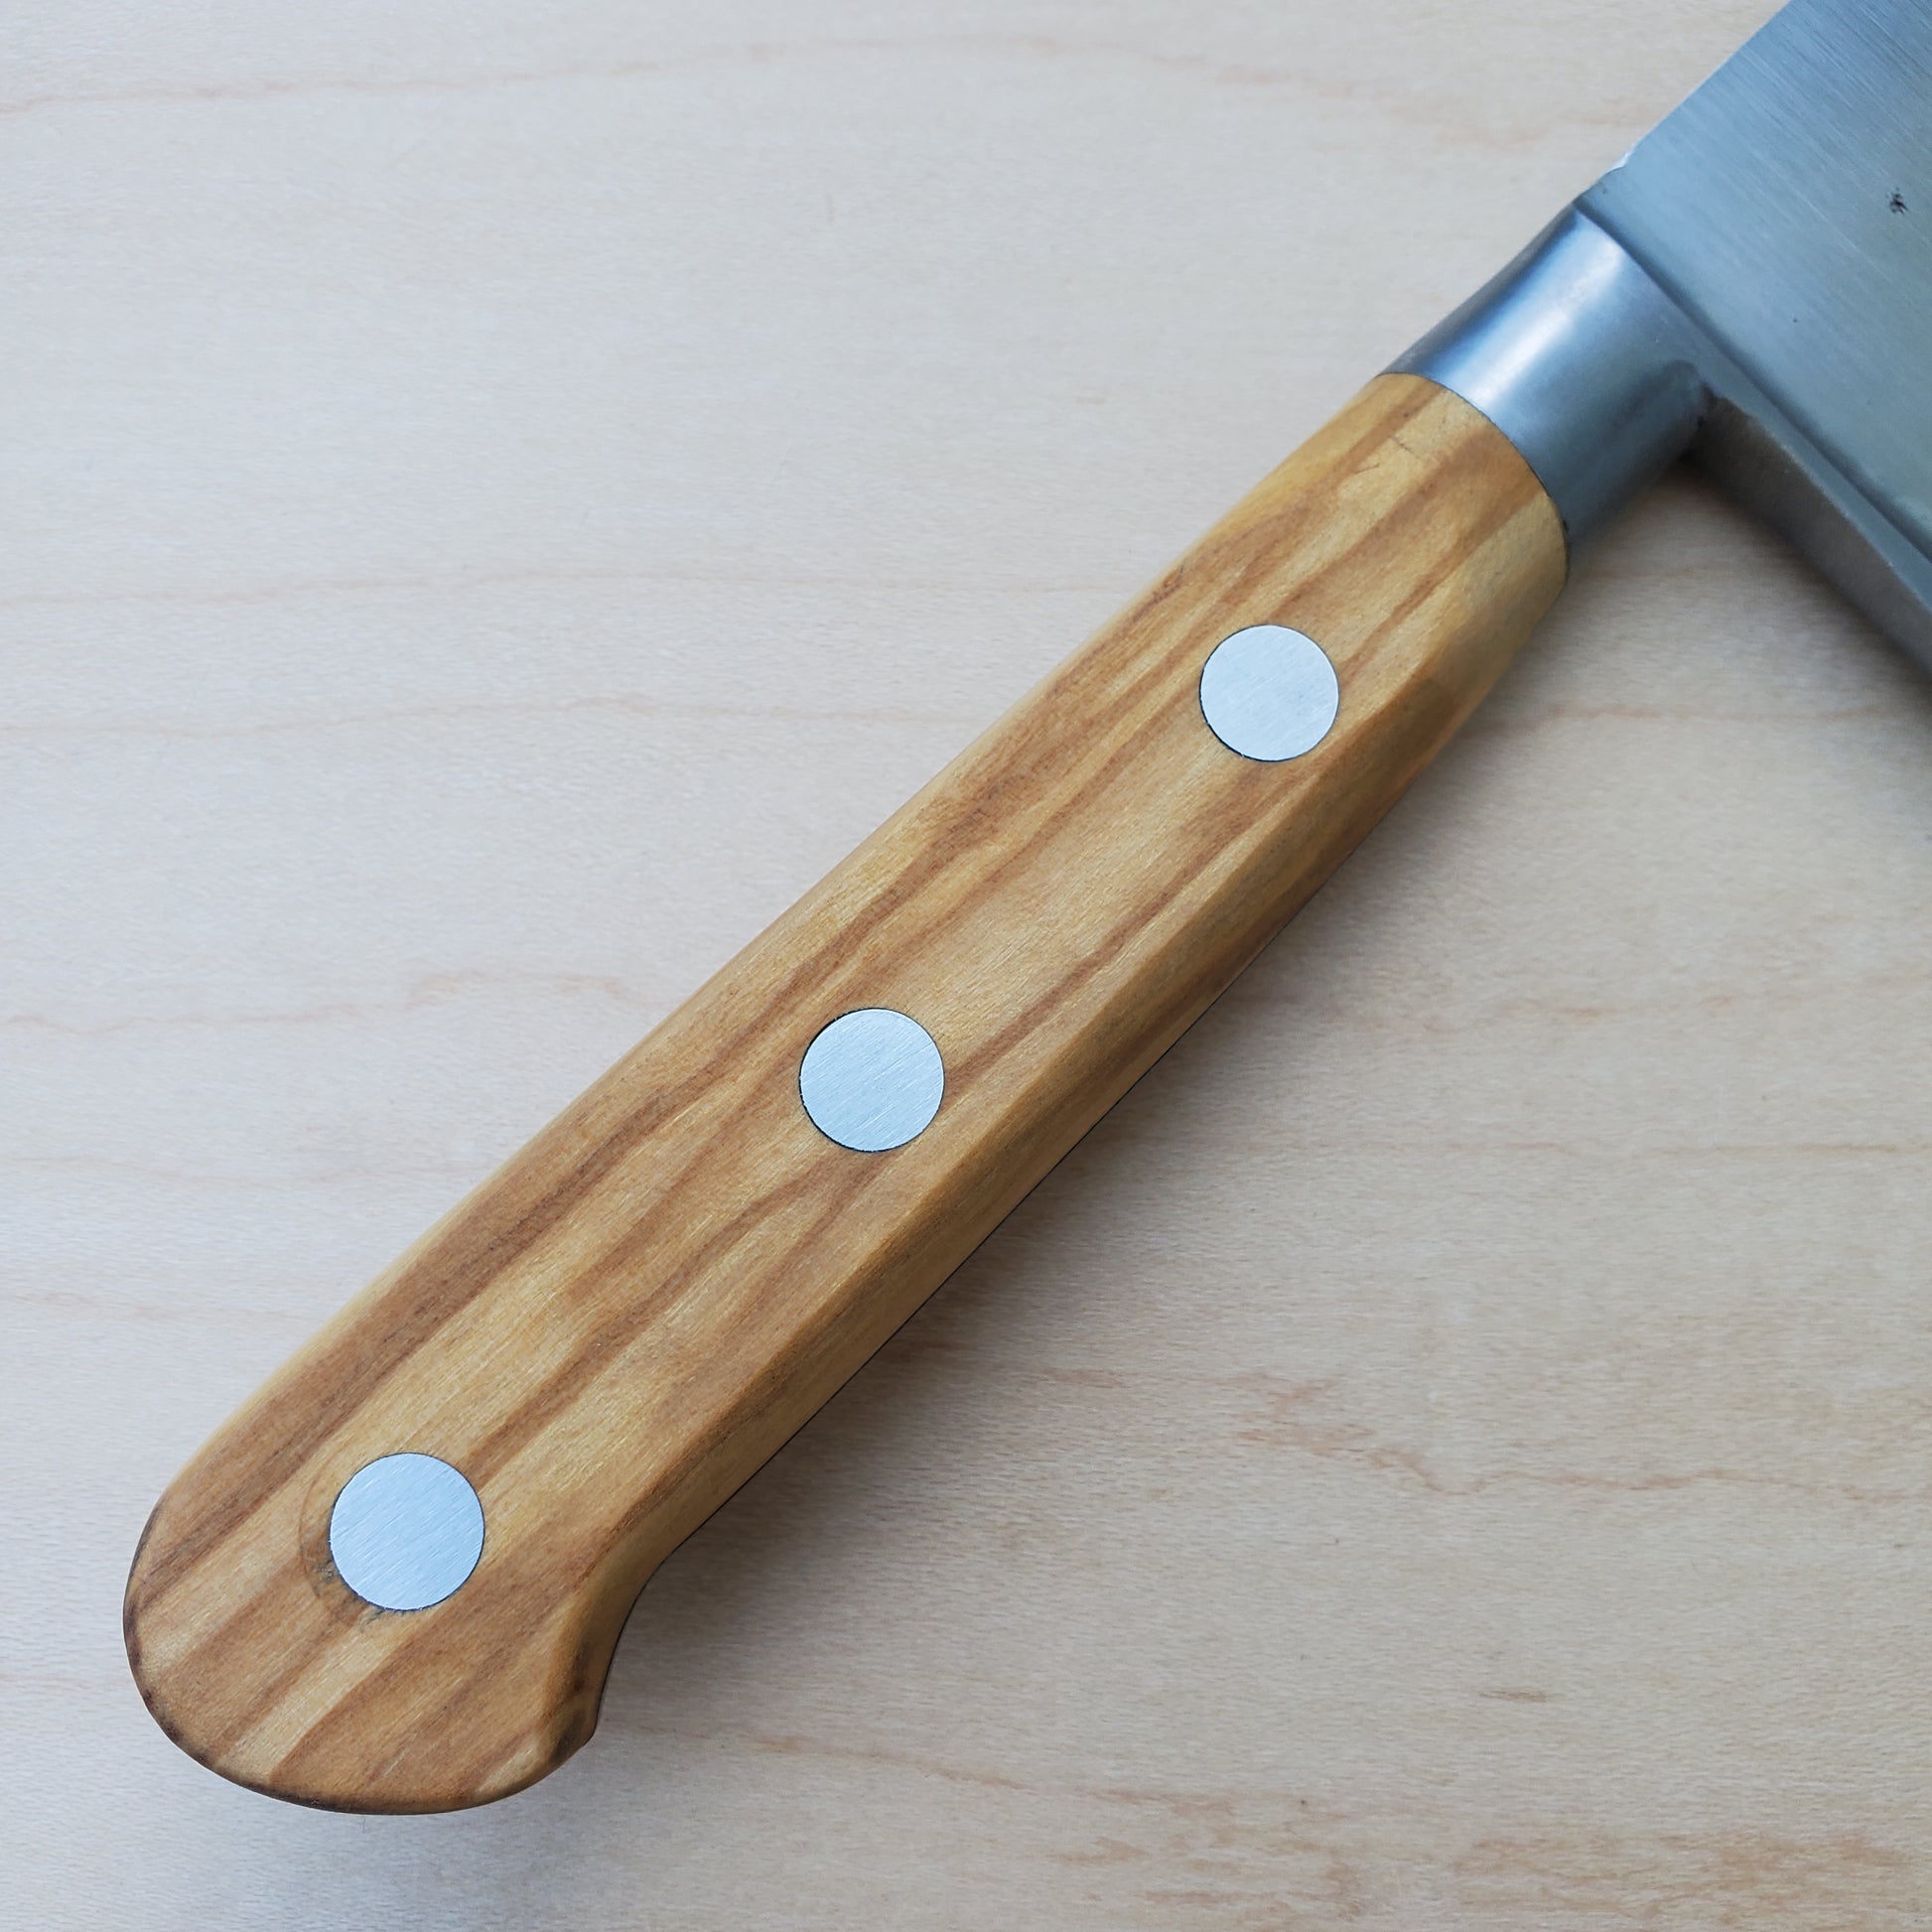 Cooking Knife 9 in - Carbon Steel - Olive Wood Handle